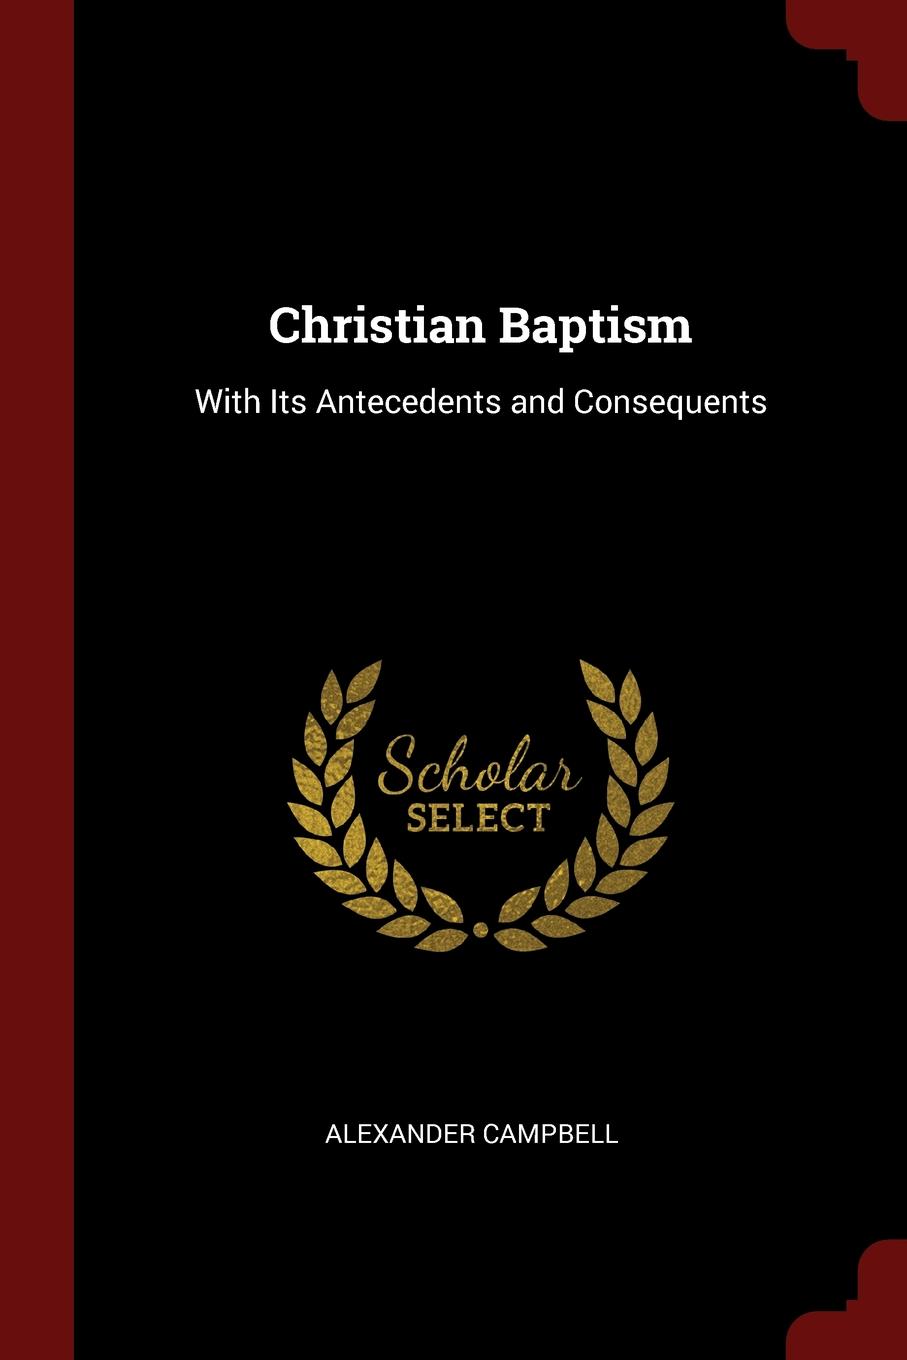 Christian Baptism. With Its Antecedents and Consequents